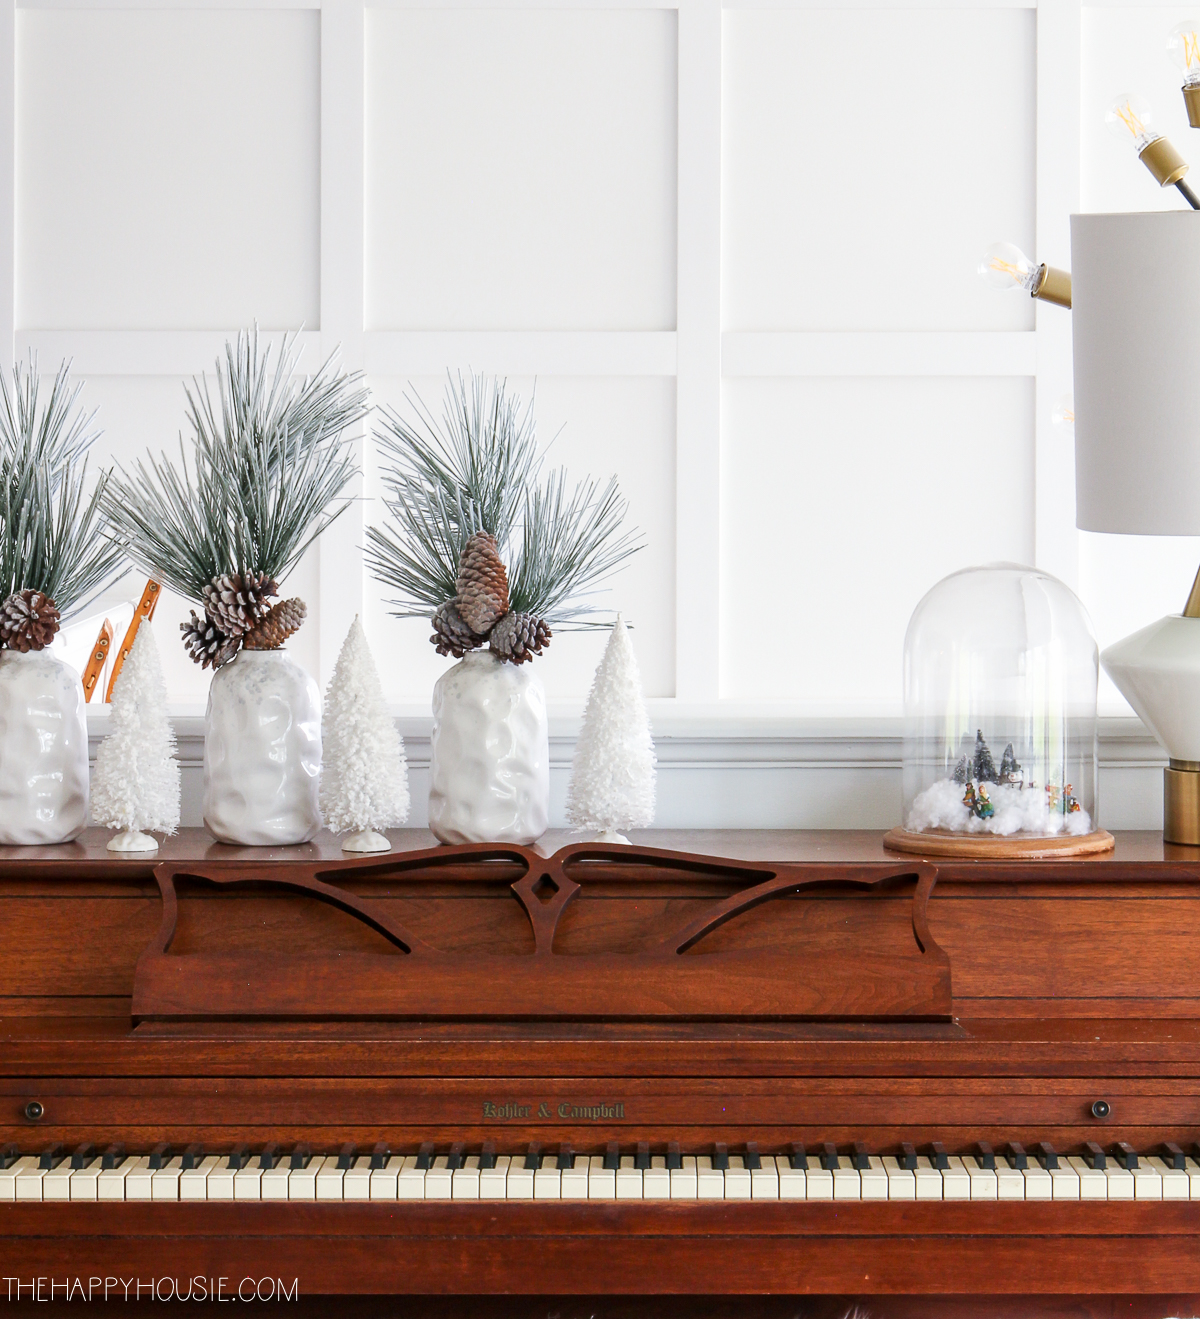 There are small white vases filled with flocked greenery and pine cones on the piano.